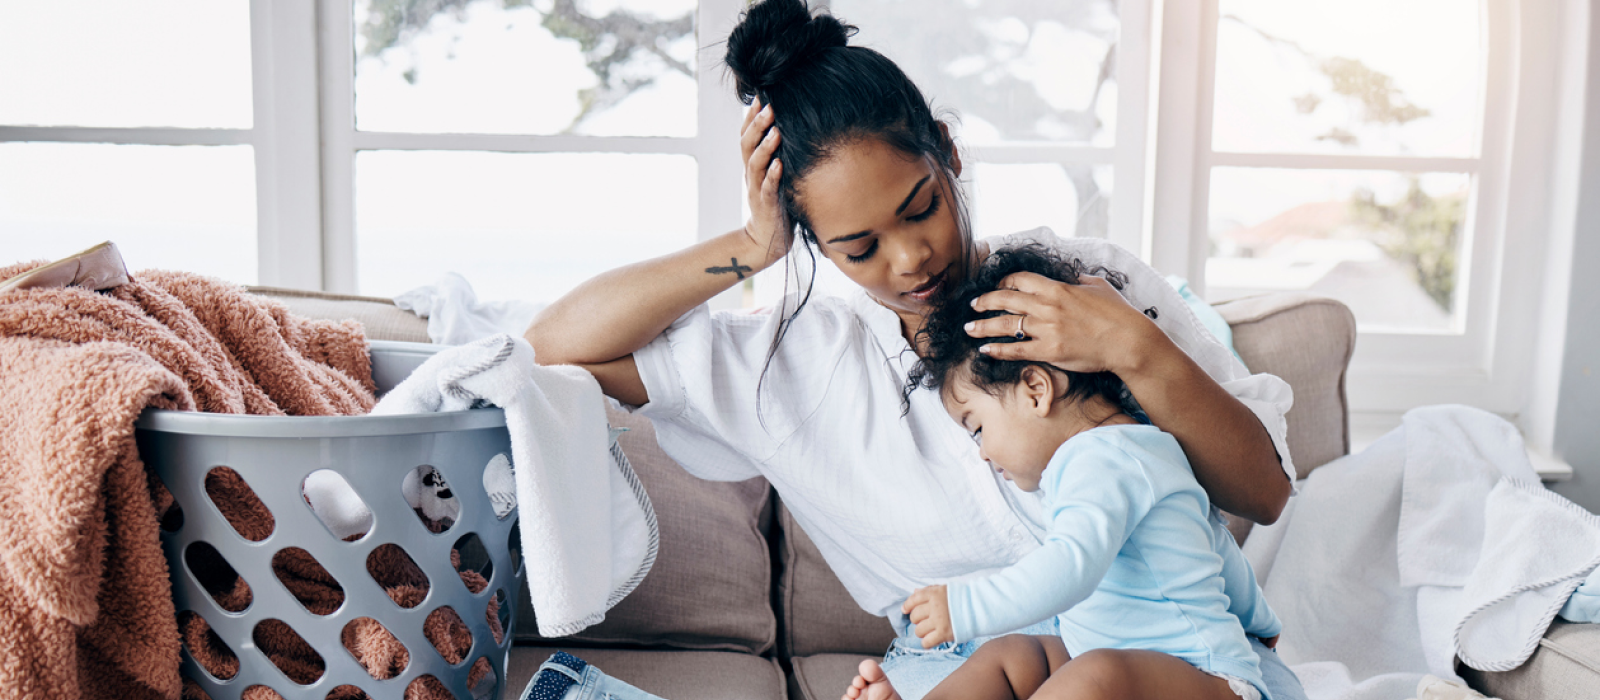 A young mom sits on her couch with her child and a lot of laundry. She is experiencing mom burnout and is considering additional approaches to parenting.